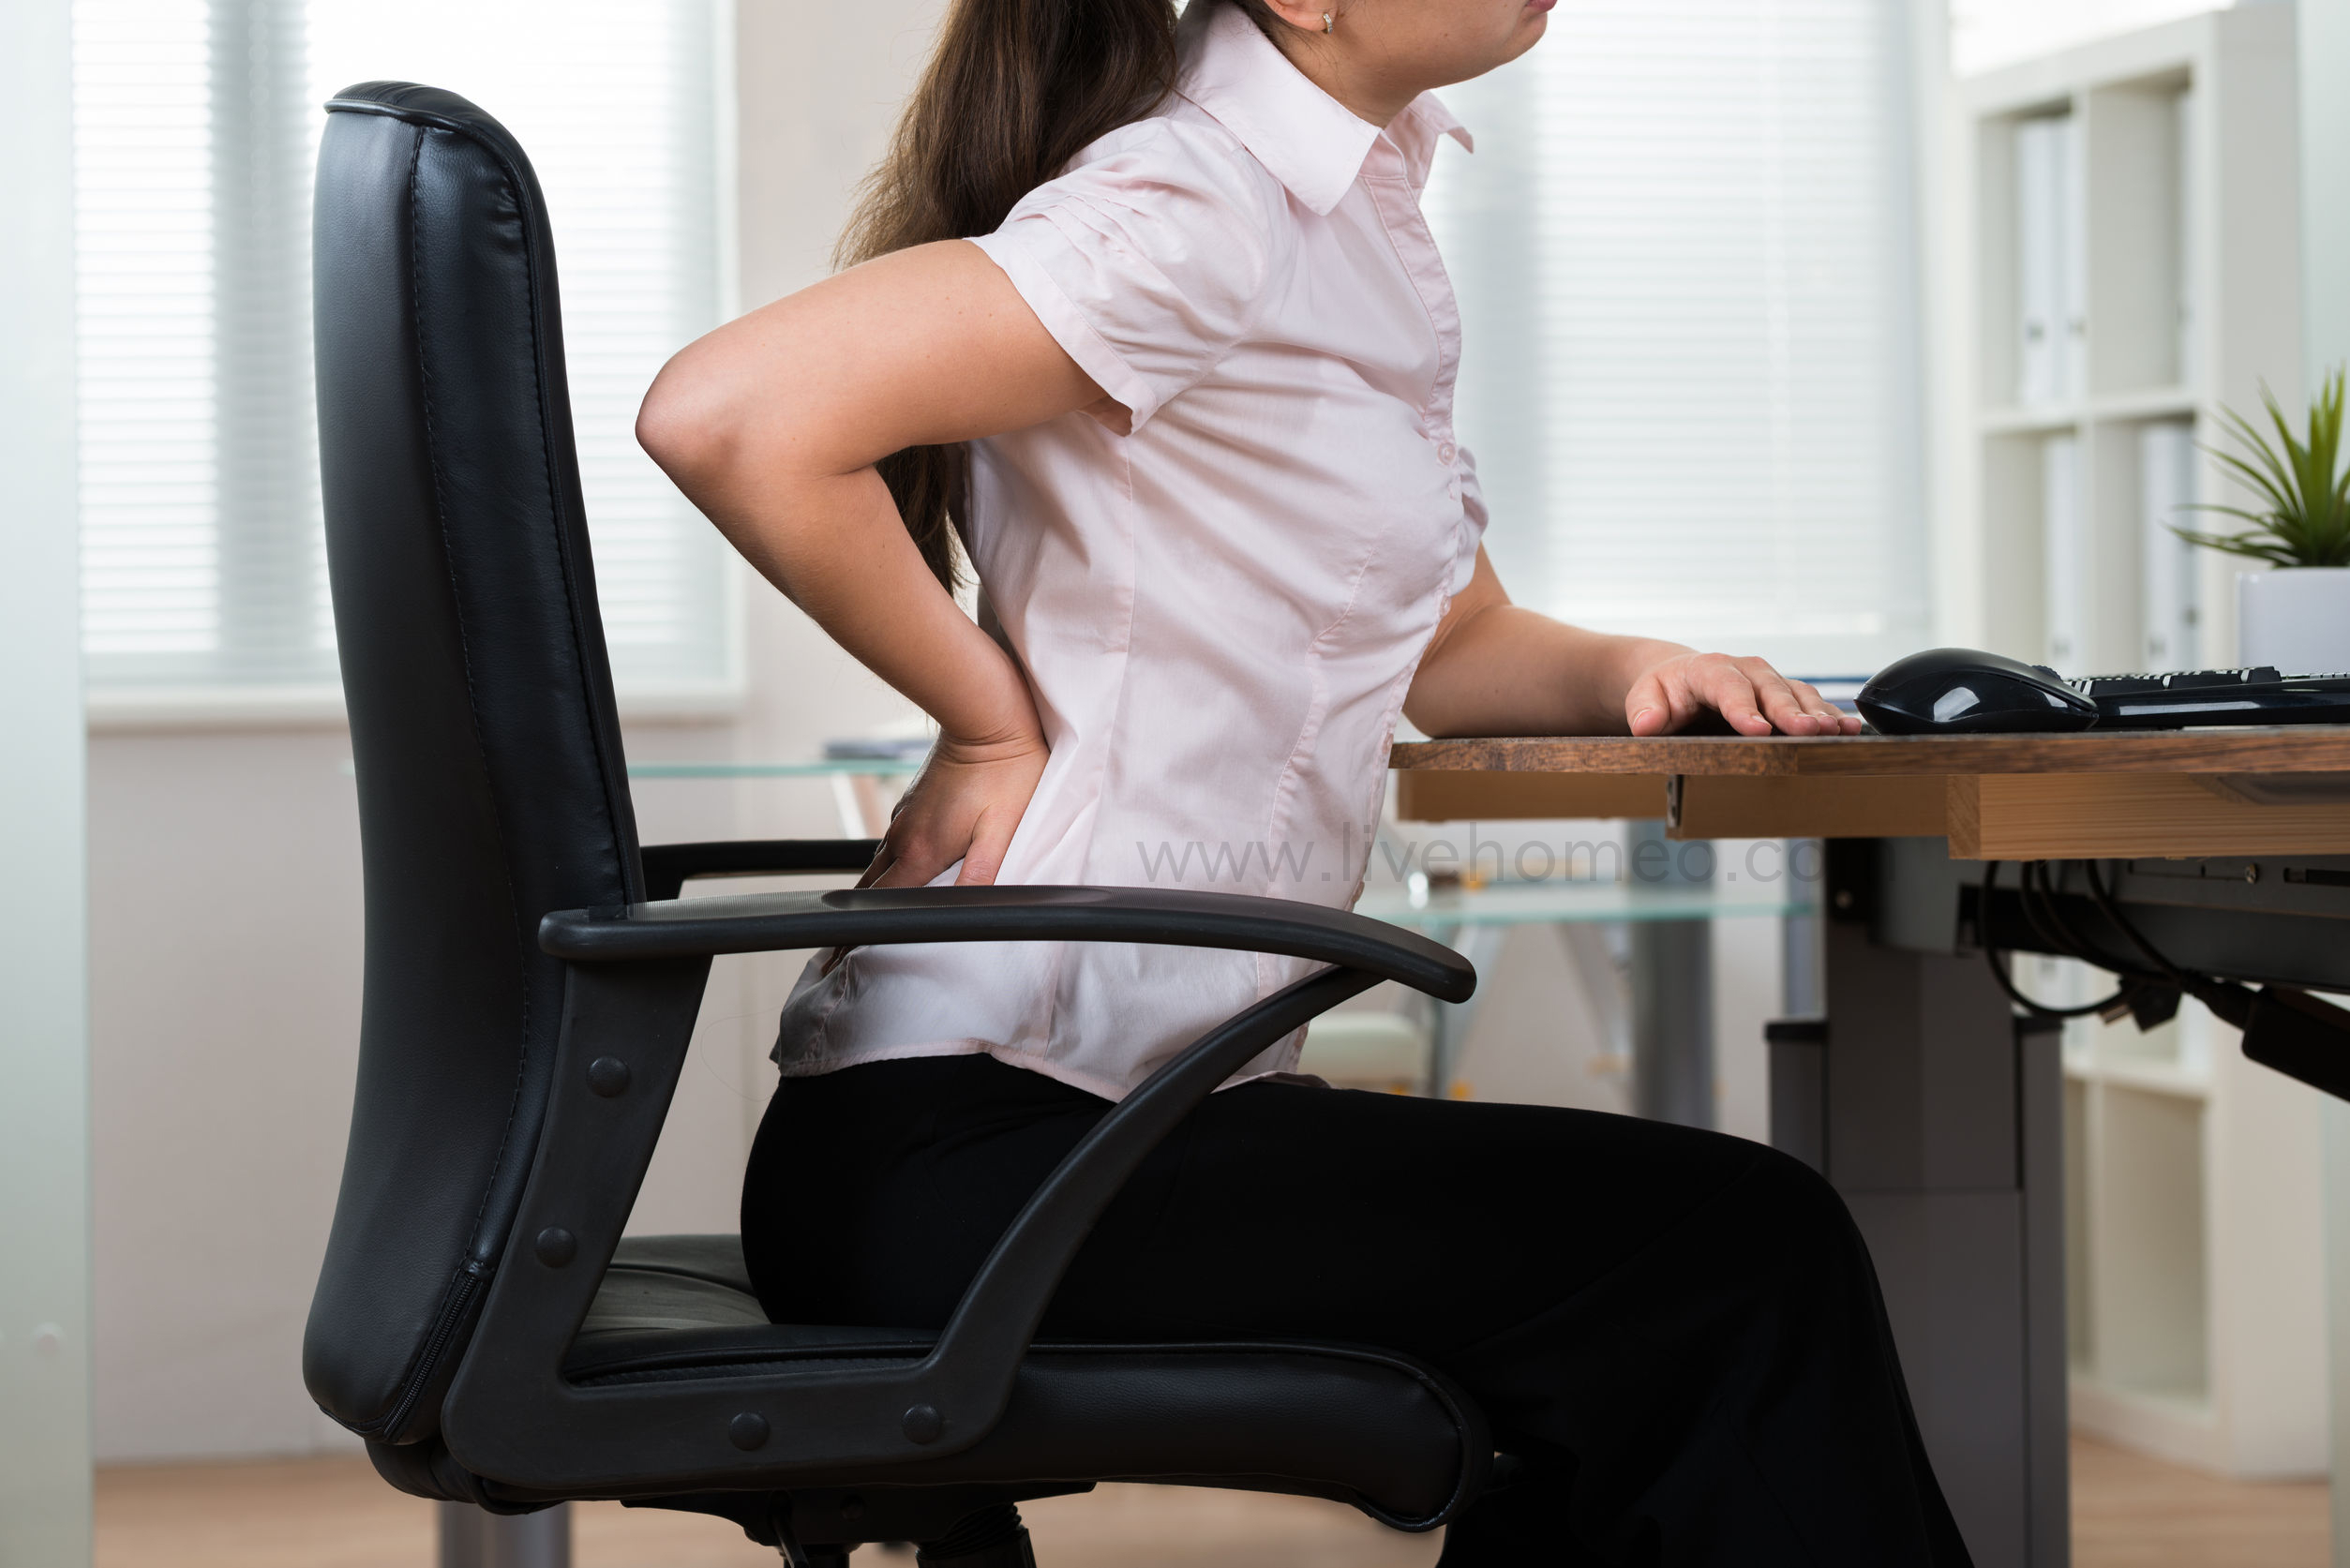 Sitting Disorders Treatment in Homeopathy